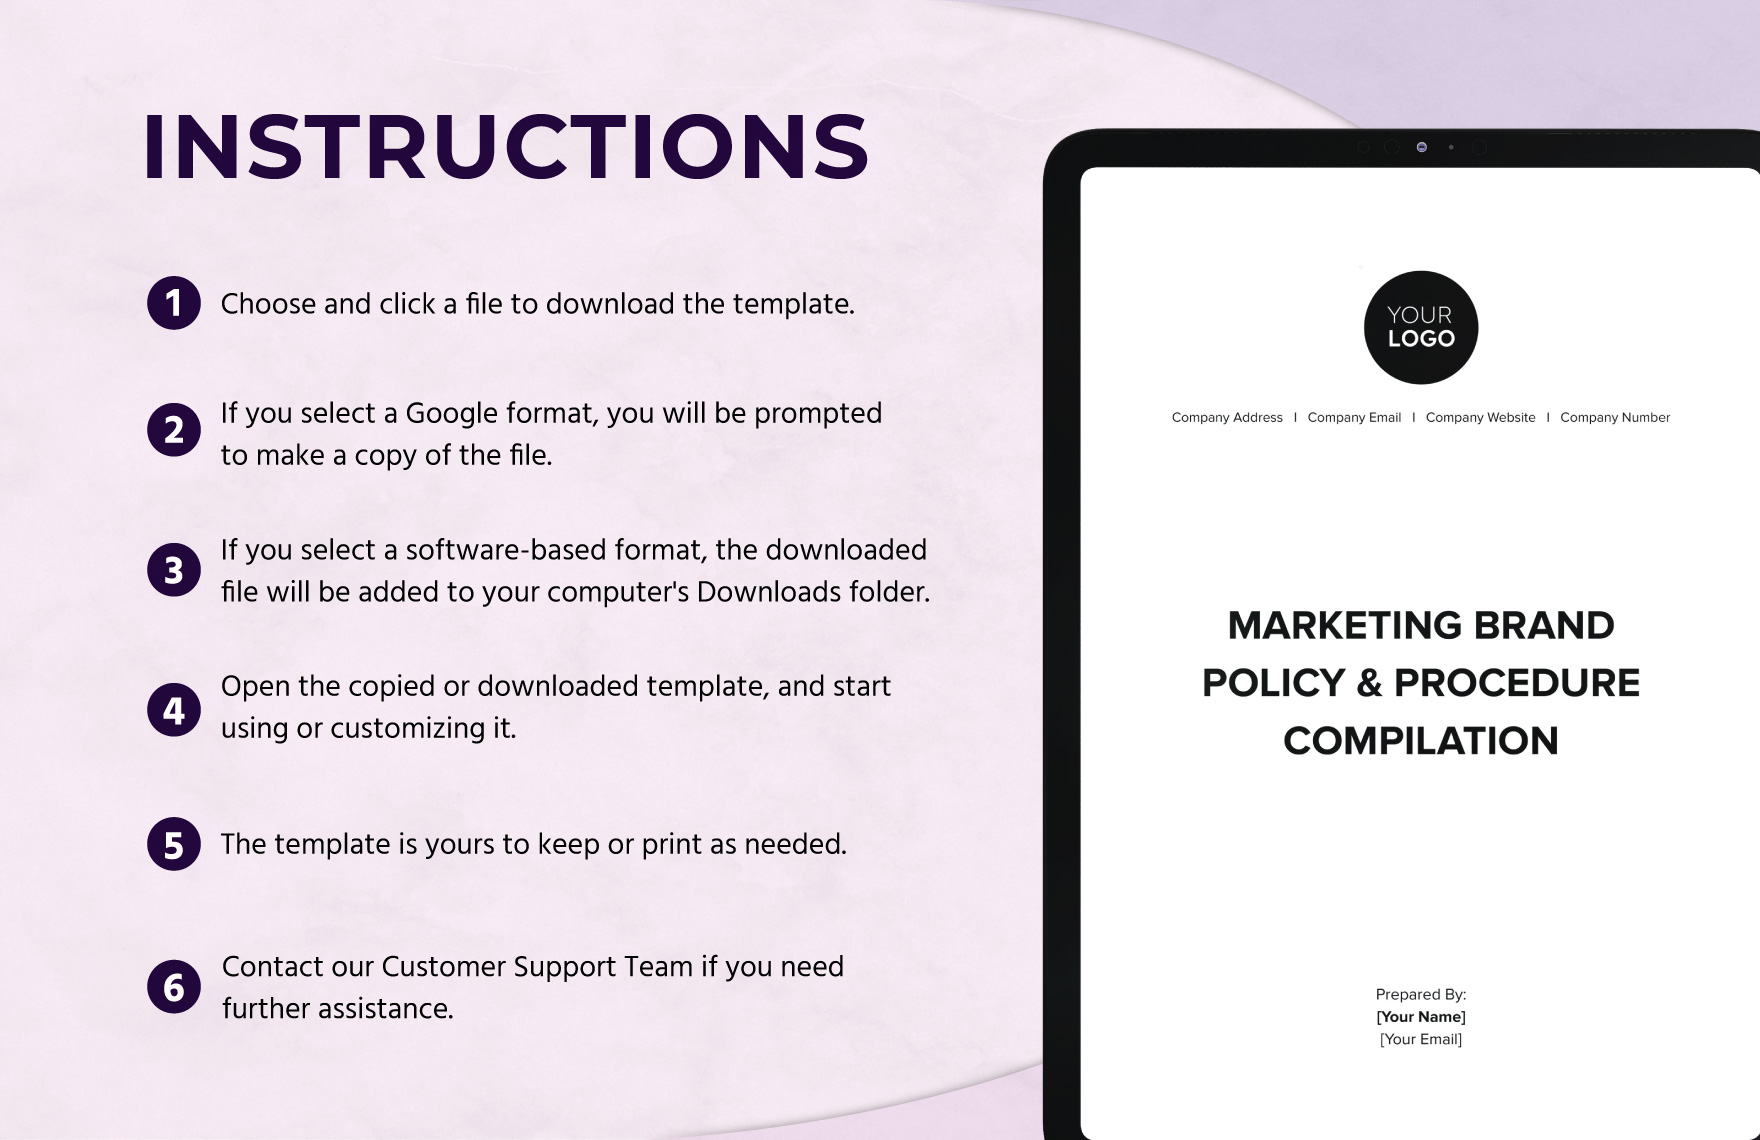 Marketing Brand Policy & Procedure Compilation Template